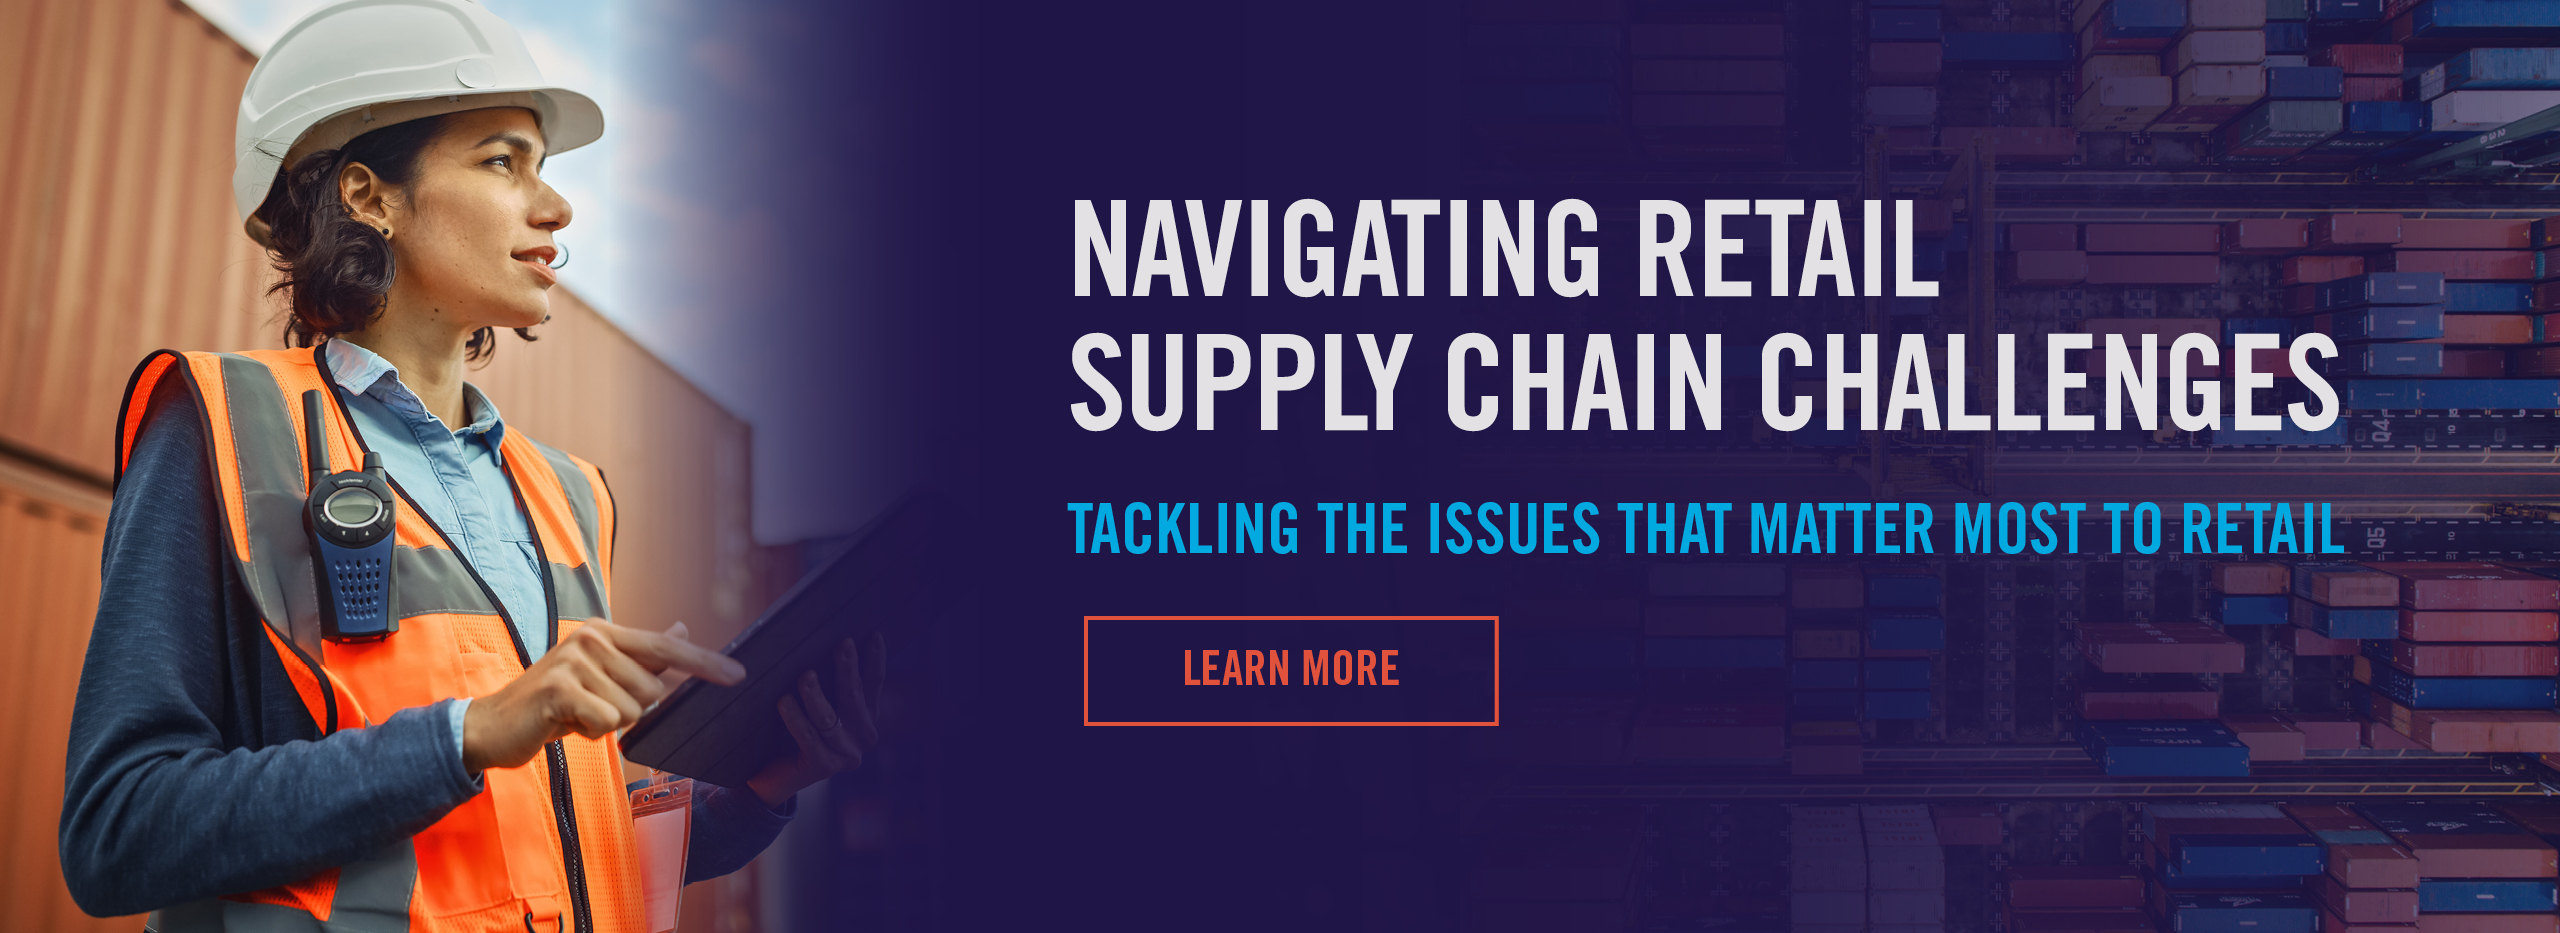 Navigating Retail Supply Chain Challenges